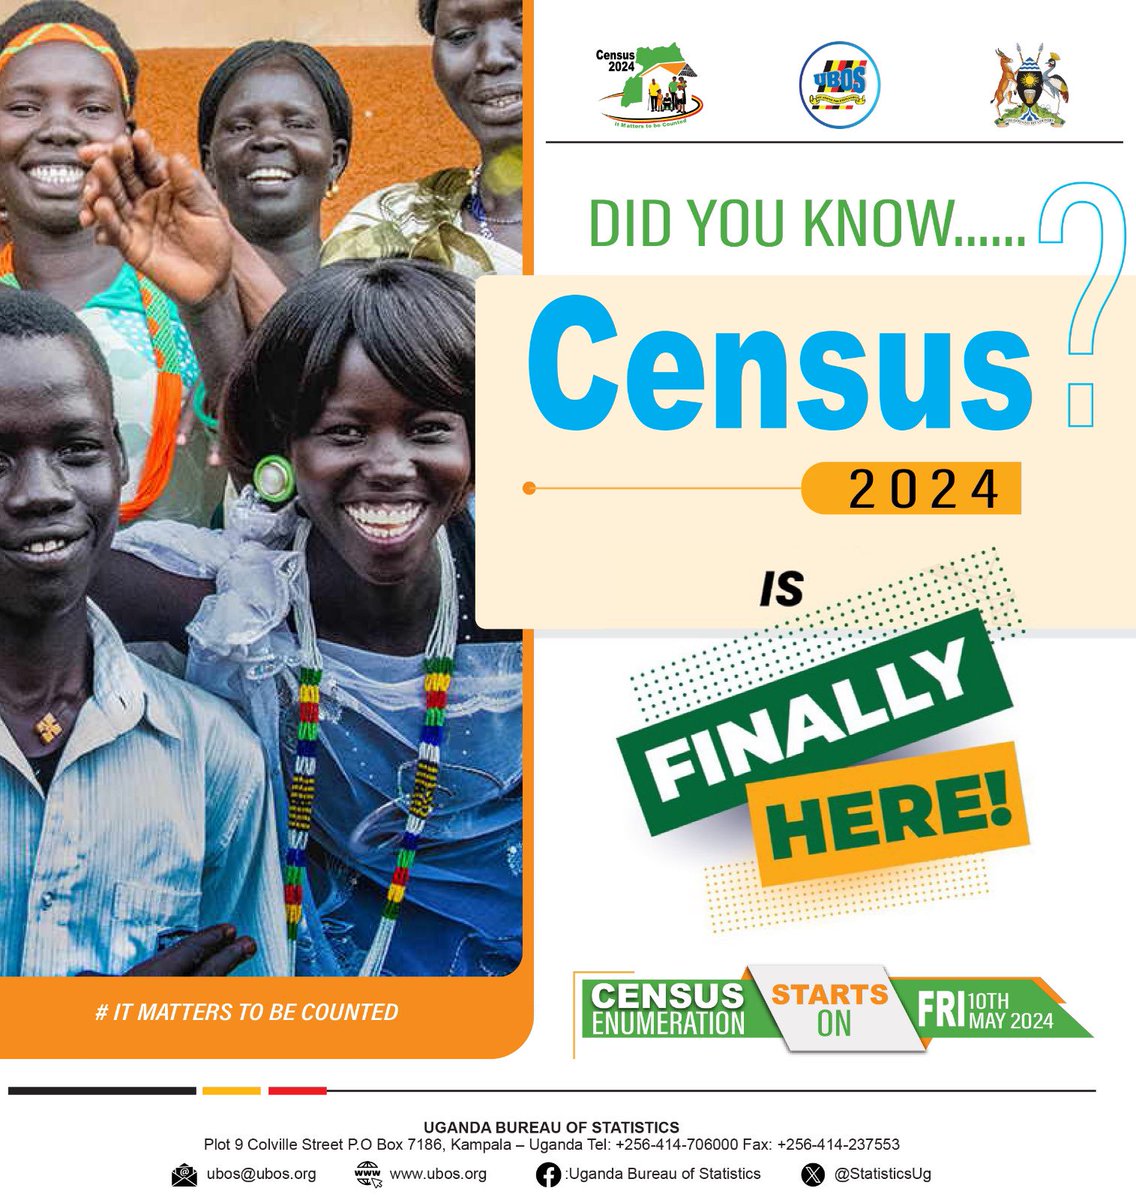 Where is the census night finding you? Make sure you are counted because it matters to be counted. Accurate Census data is valuable and essential for economic development, transportation, healthcare, education and business planning and decision making. #UgandaCensus2024